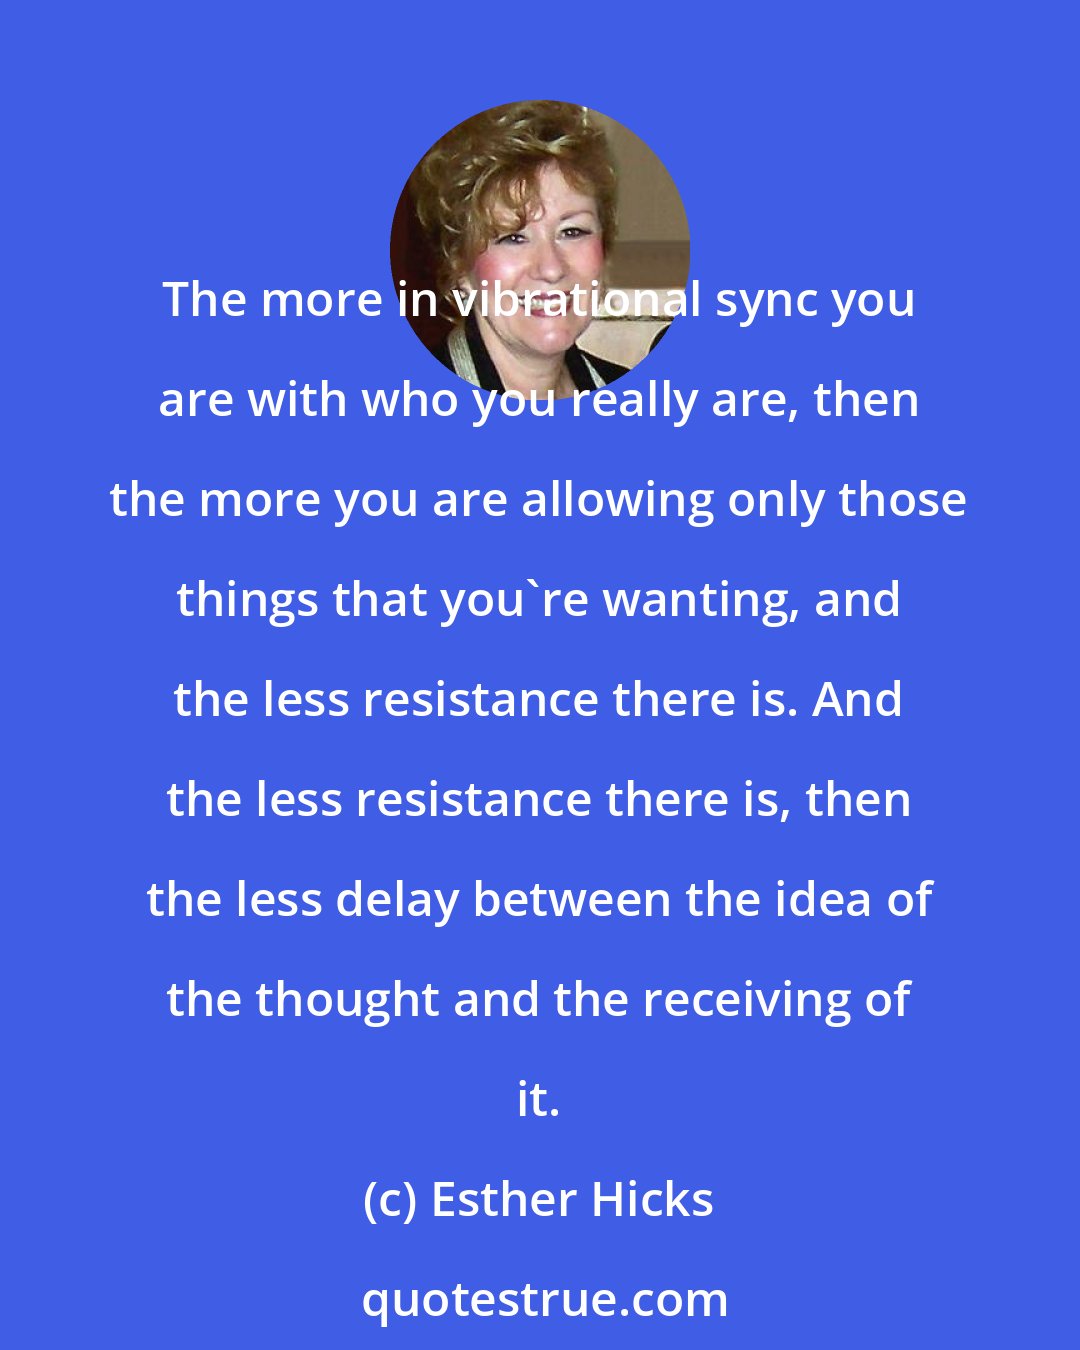 Esther Hicks: The more in vibrational sync you are with who you really are, then the more you are allowing only those things that you're wanting, and the less resistance there is. And the less resistance there is, then the less delay between the idea of the thought and the receiving of it.